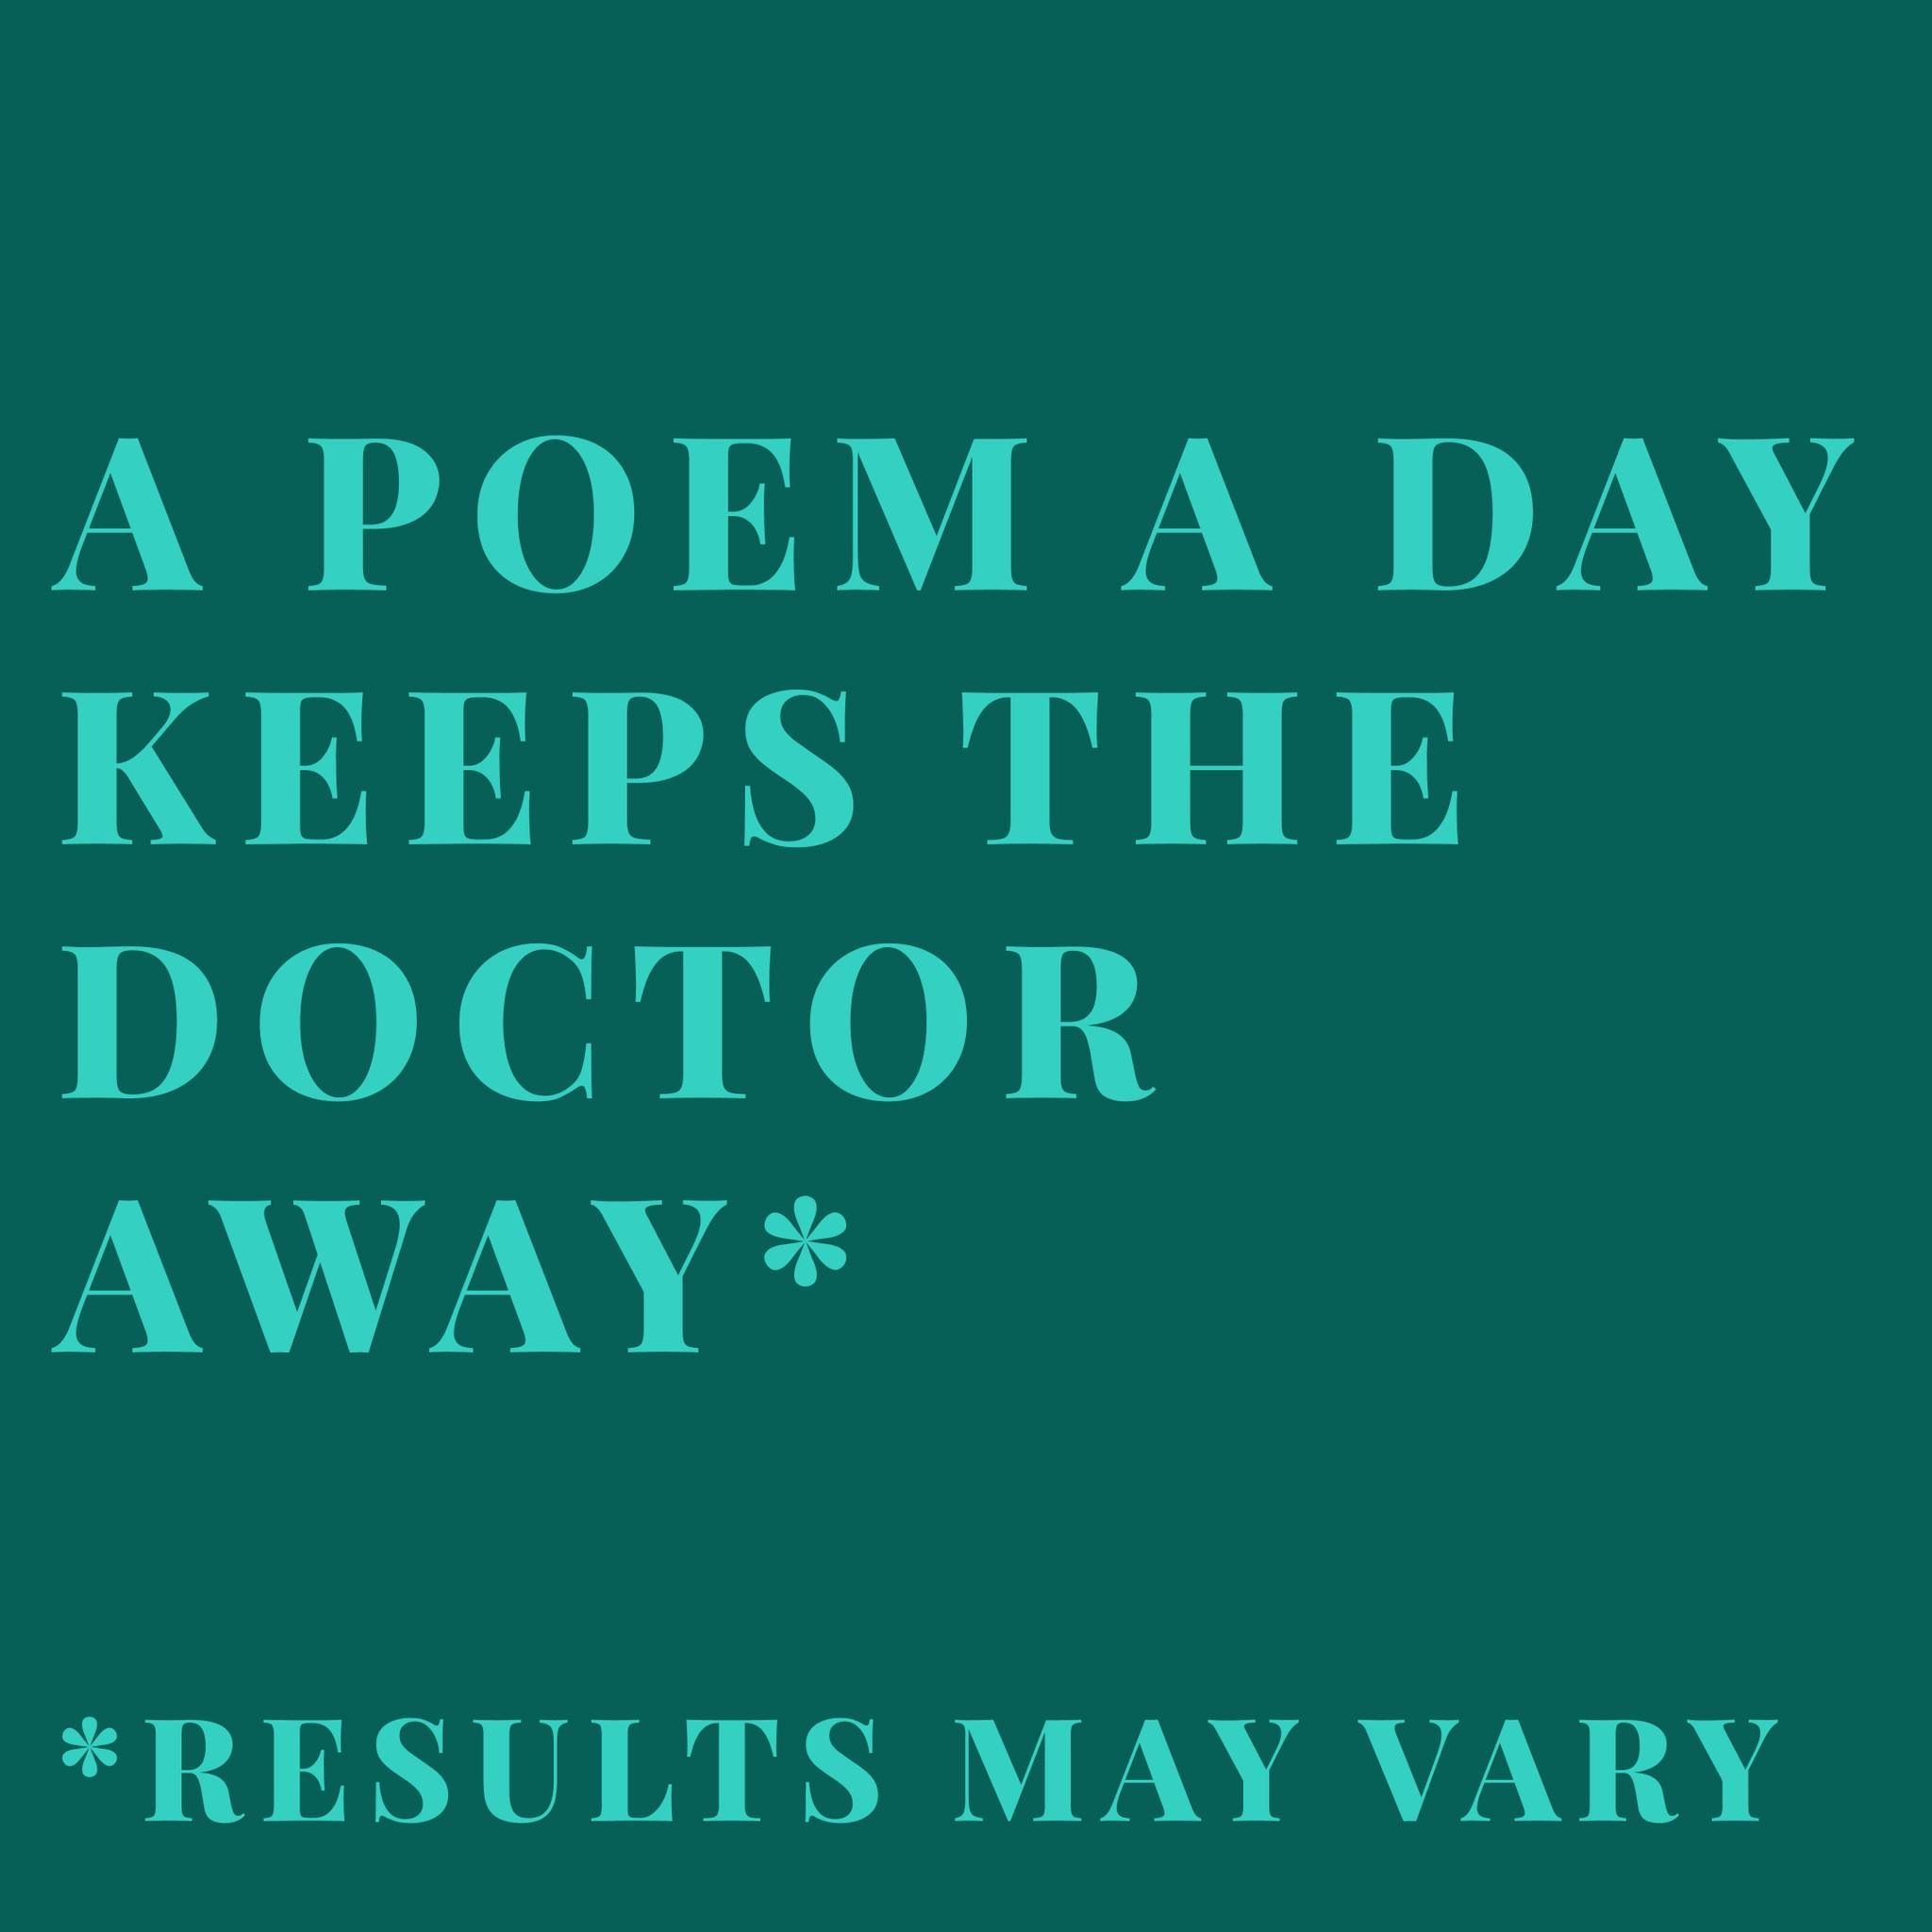 Did you know you can send yourself a poem a day? Visit poets.org. Choose a poem a day, give your email and it will come right to your inbox. Instant joy.